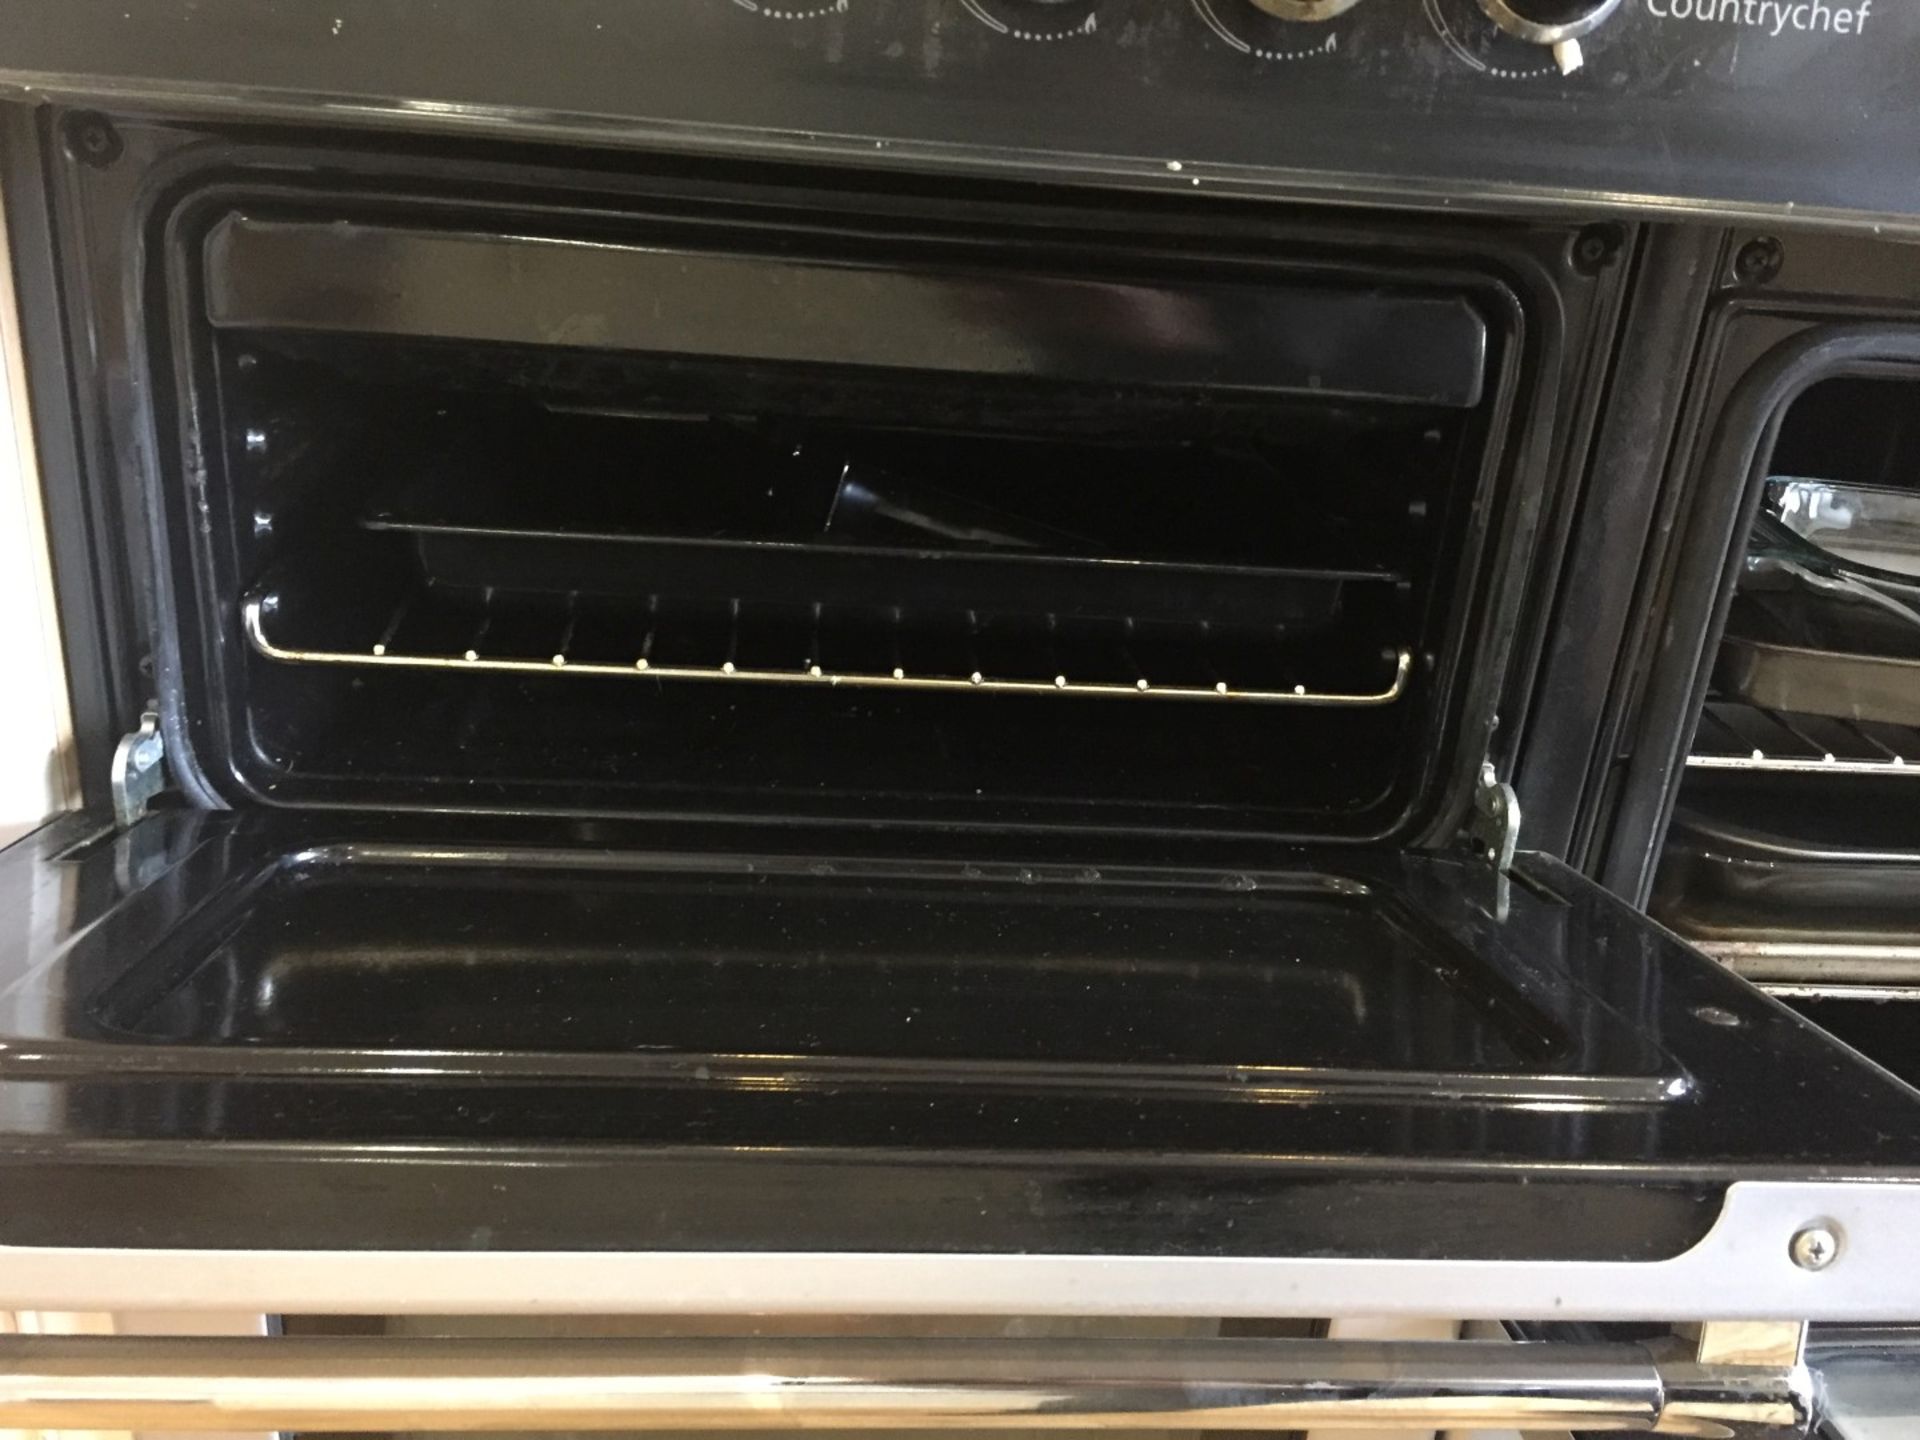 1 x Belling 100G Silver Countrychef 8-Burner, 2 Oven Range - In Good Working Condition - CL238 - - Image 8 of 13